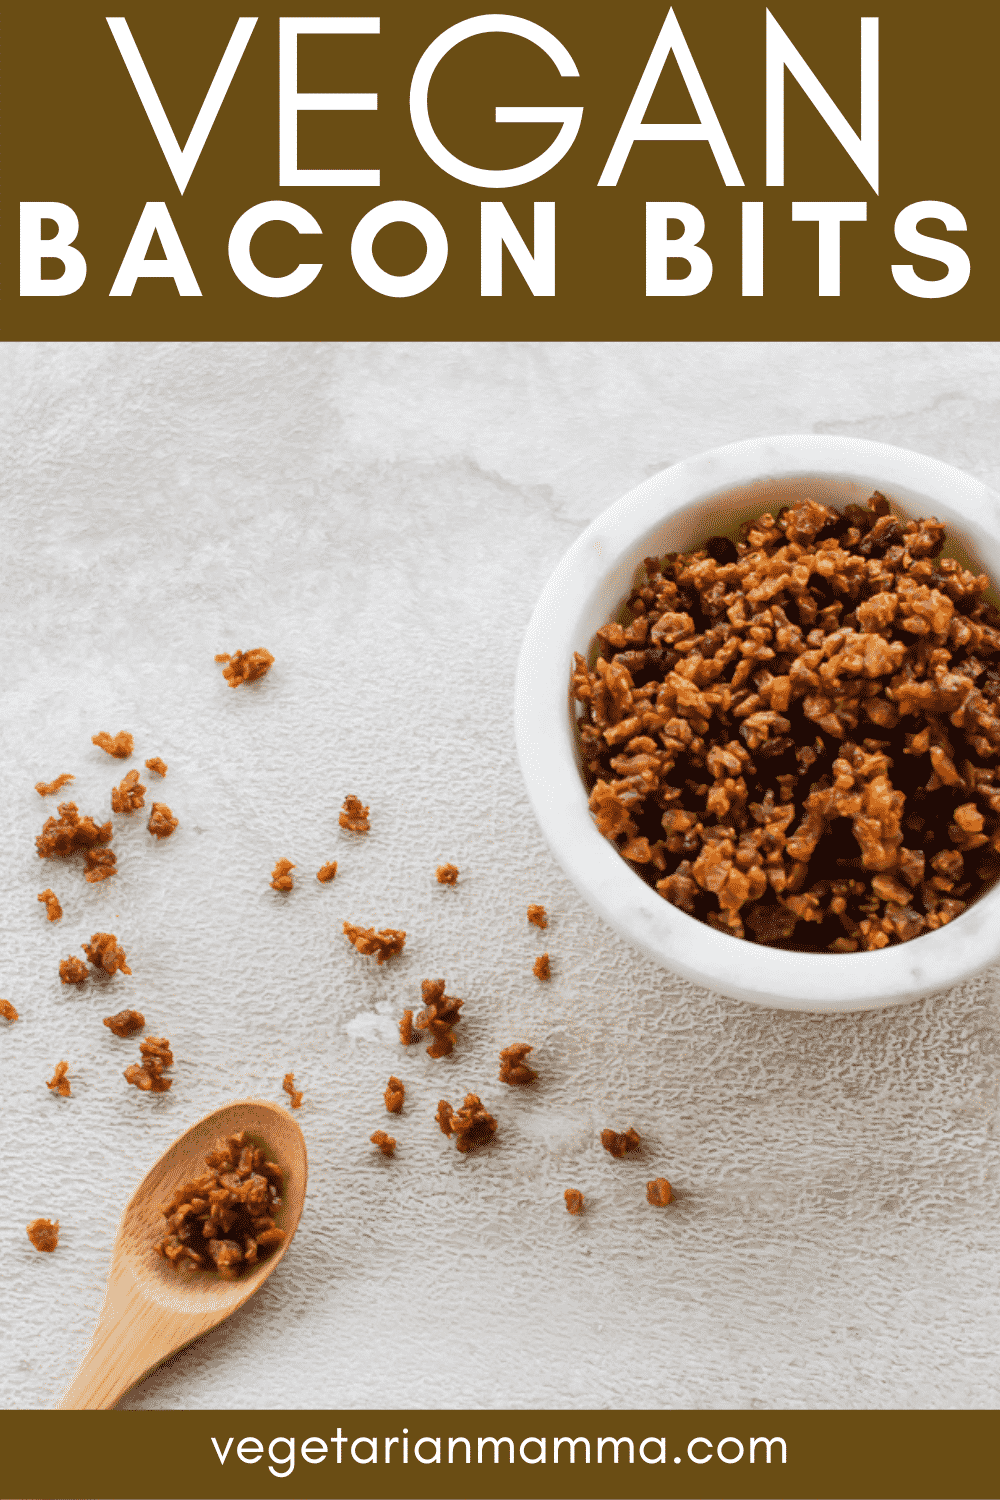 Vegan Bacon Bits are the perfect salty, smokey, sweet crunch! Add this meatless bacon to your favorite soup or salad. #vegan #bacon #soup #baconbits #veganbacon